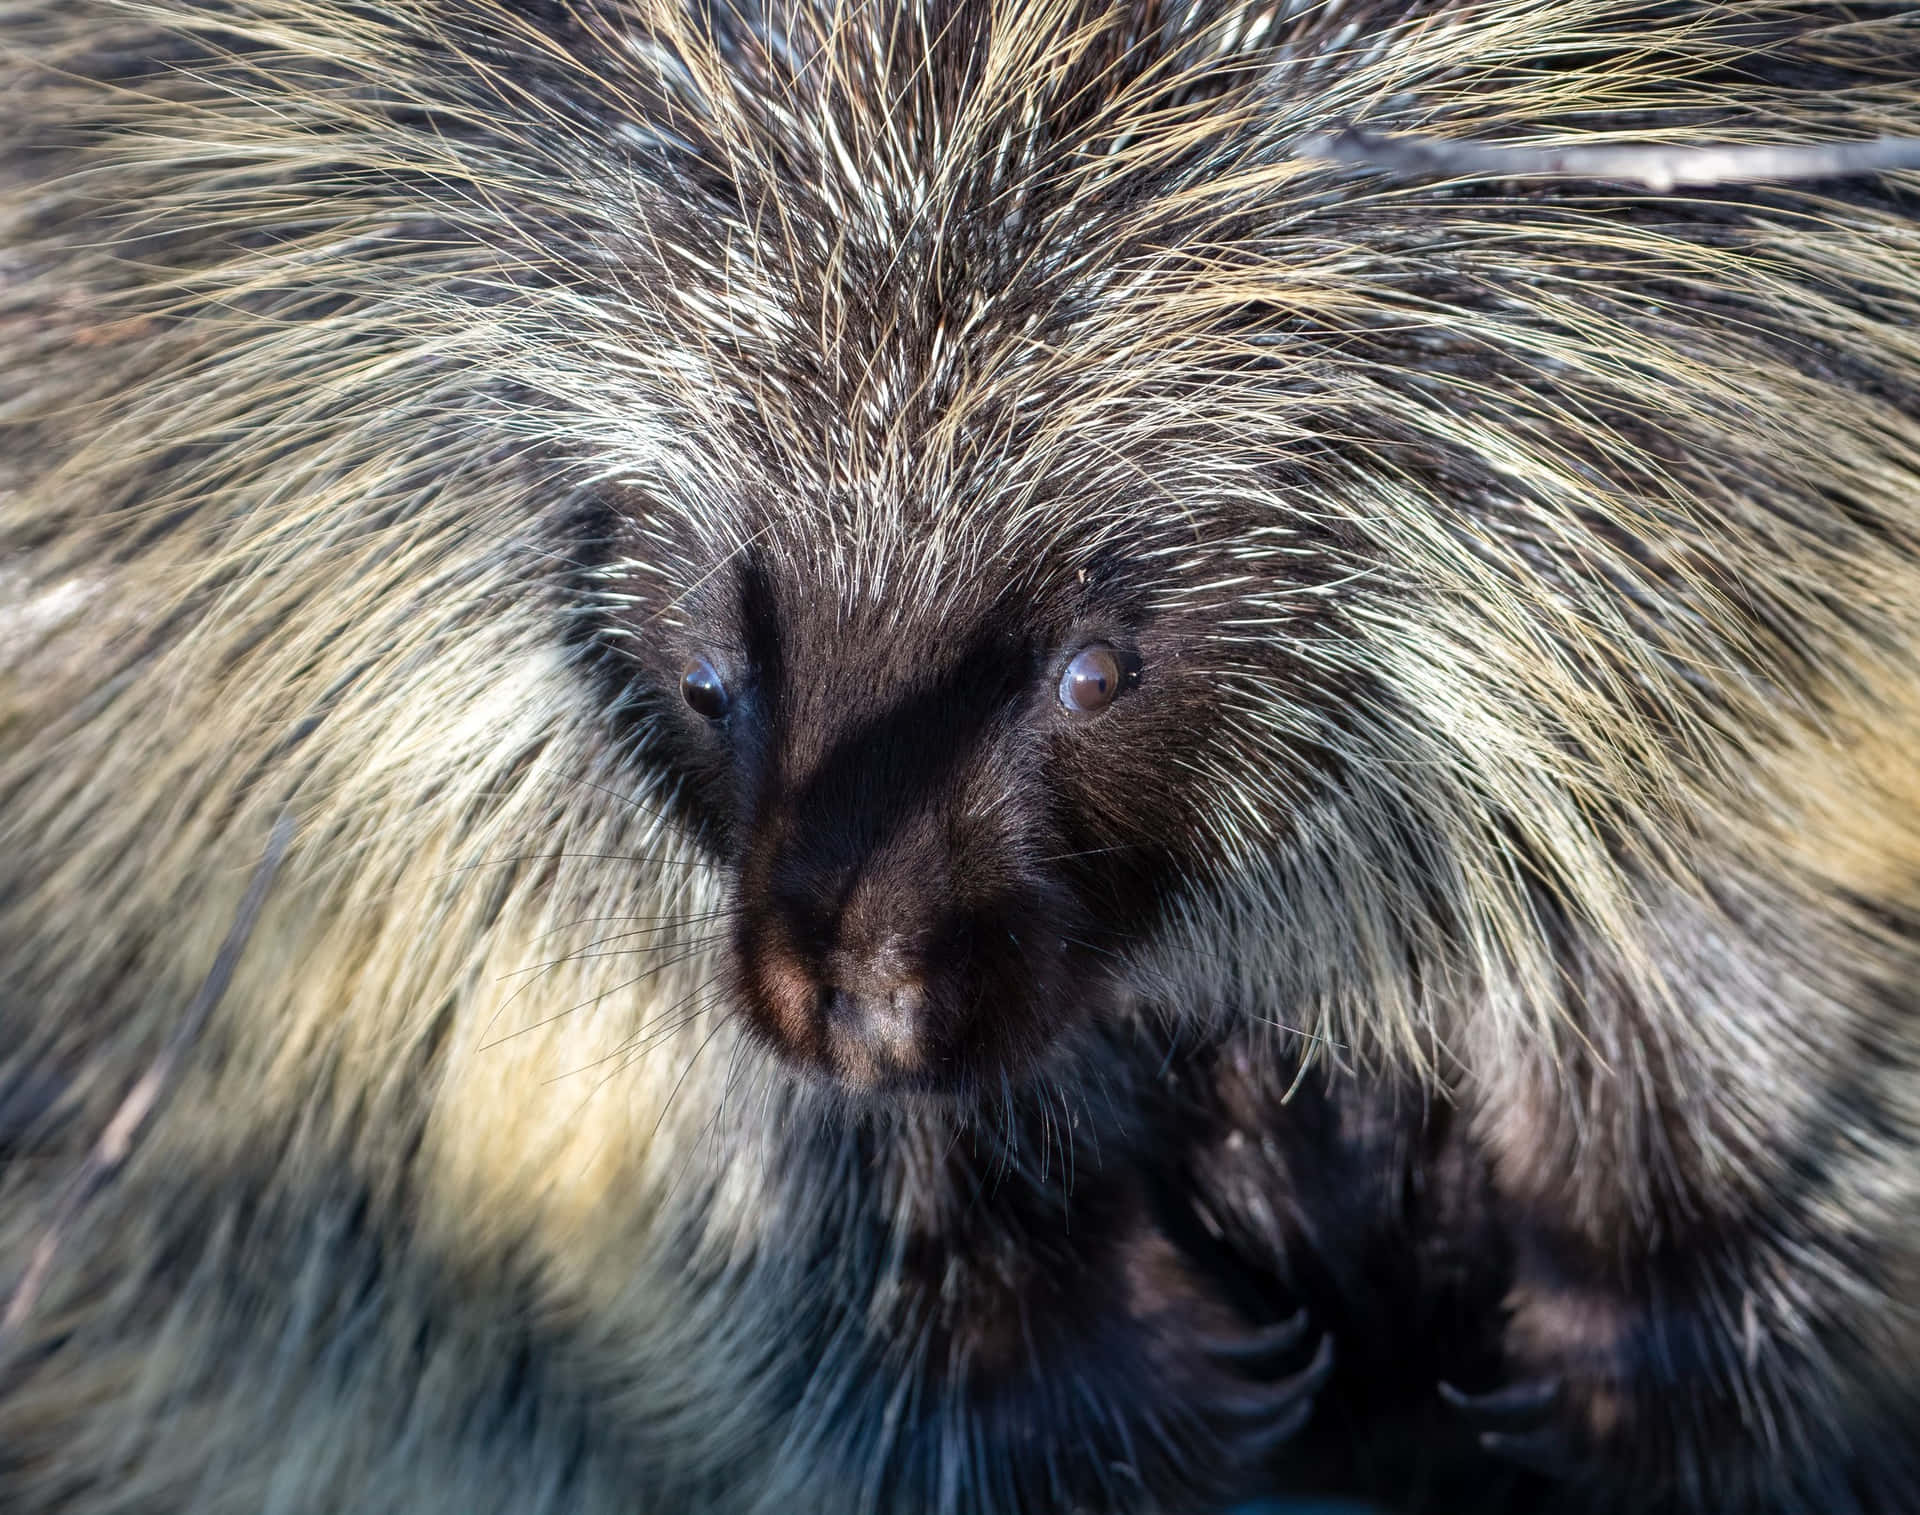 Porcupine Rodents Close-up Picture